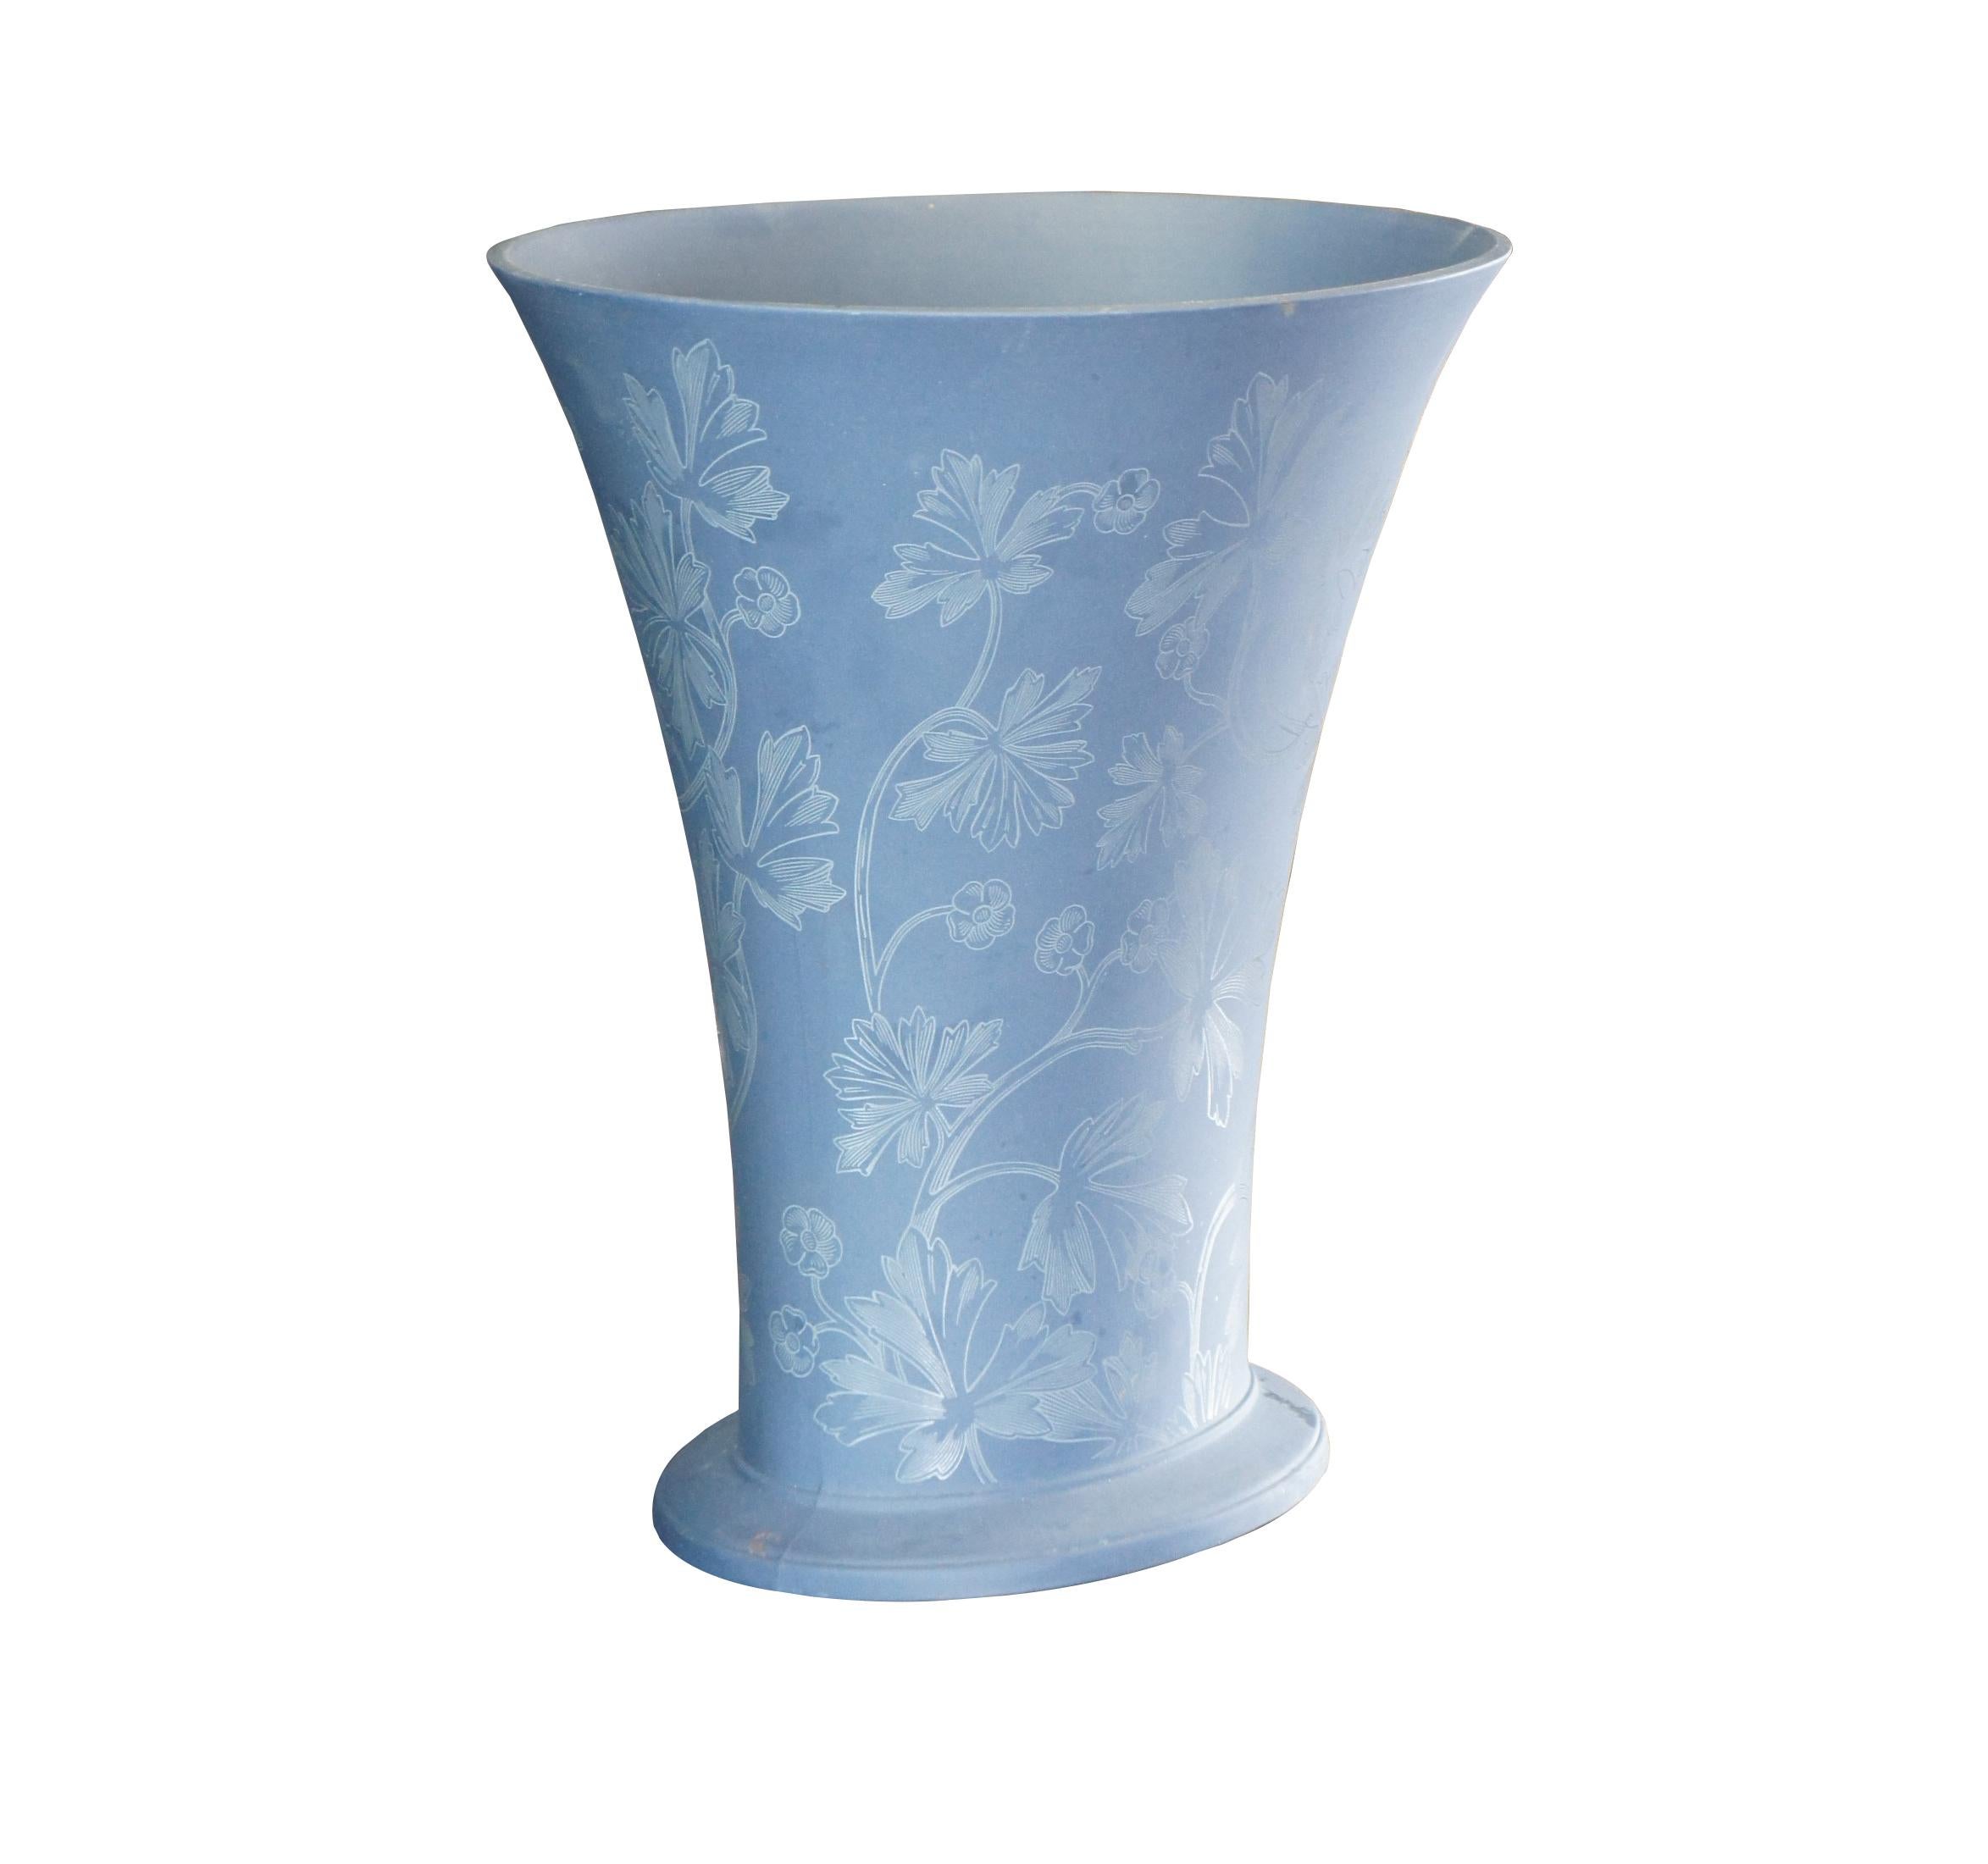 Vintage Wedgwood Interiors flared vase featuring oval form with an etched floral leaf design and footed base.

Dimensions:
9.25